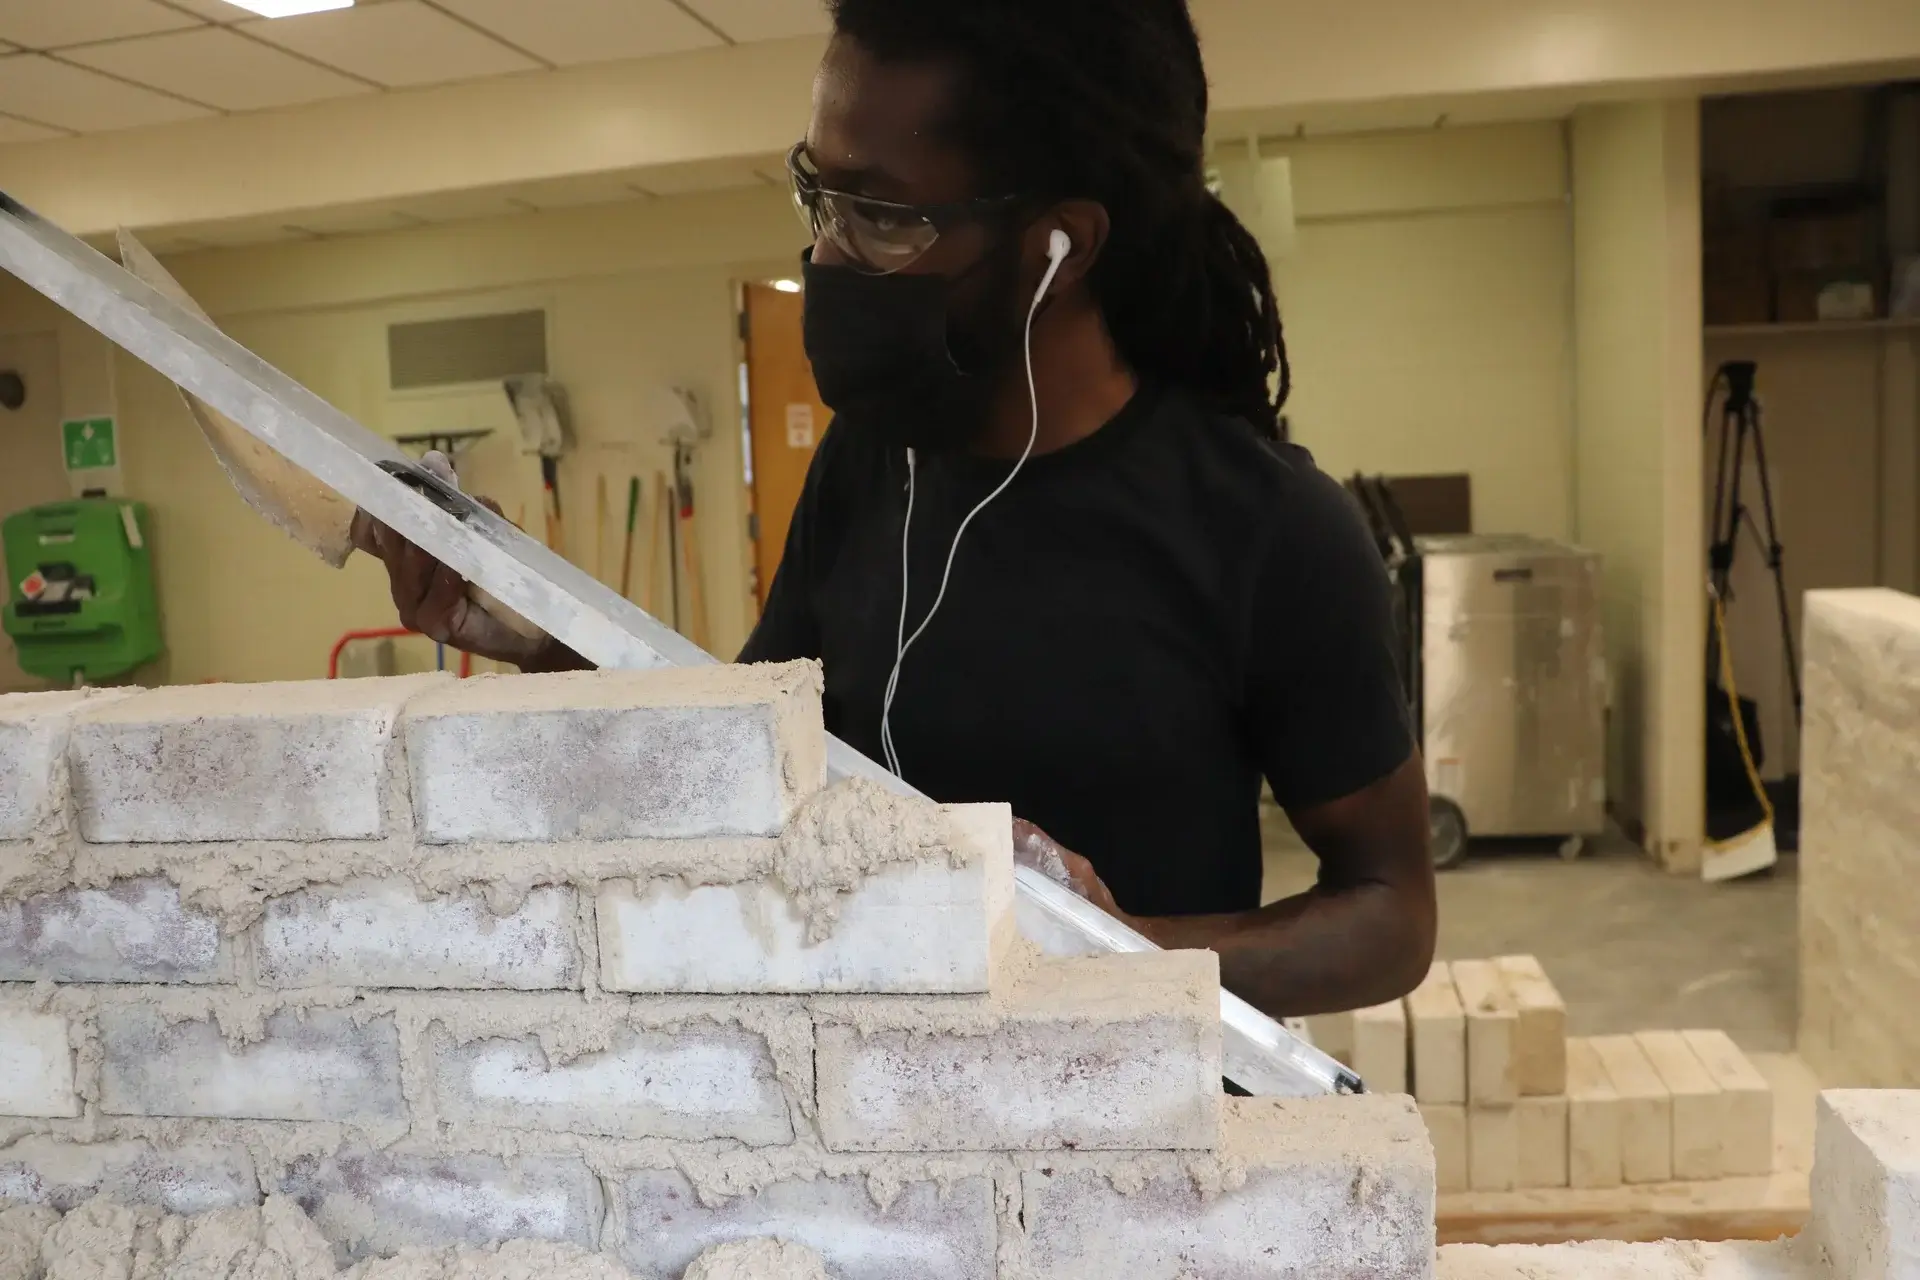 Masonry Jobs In Manufacturing: Creating Quality Products